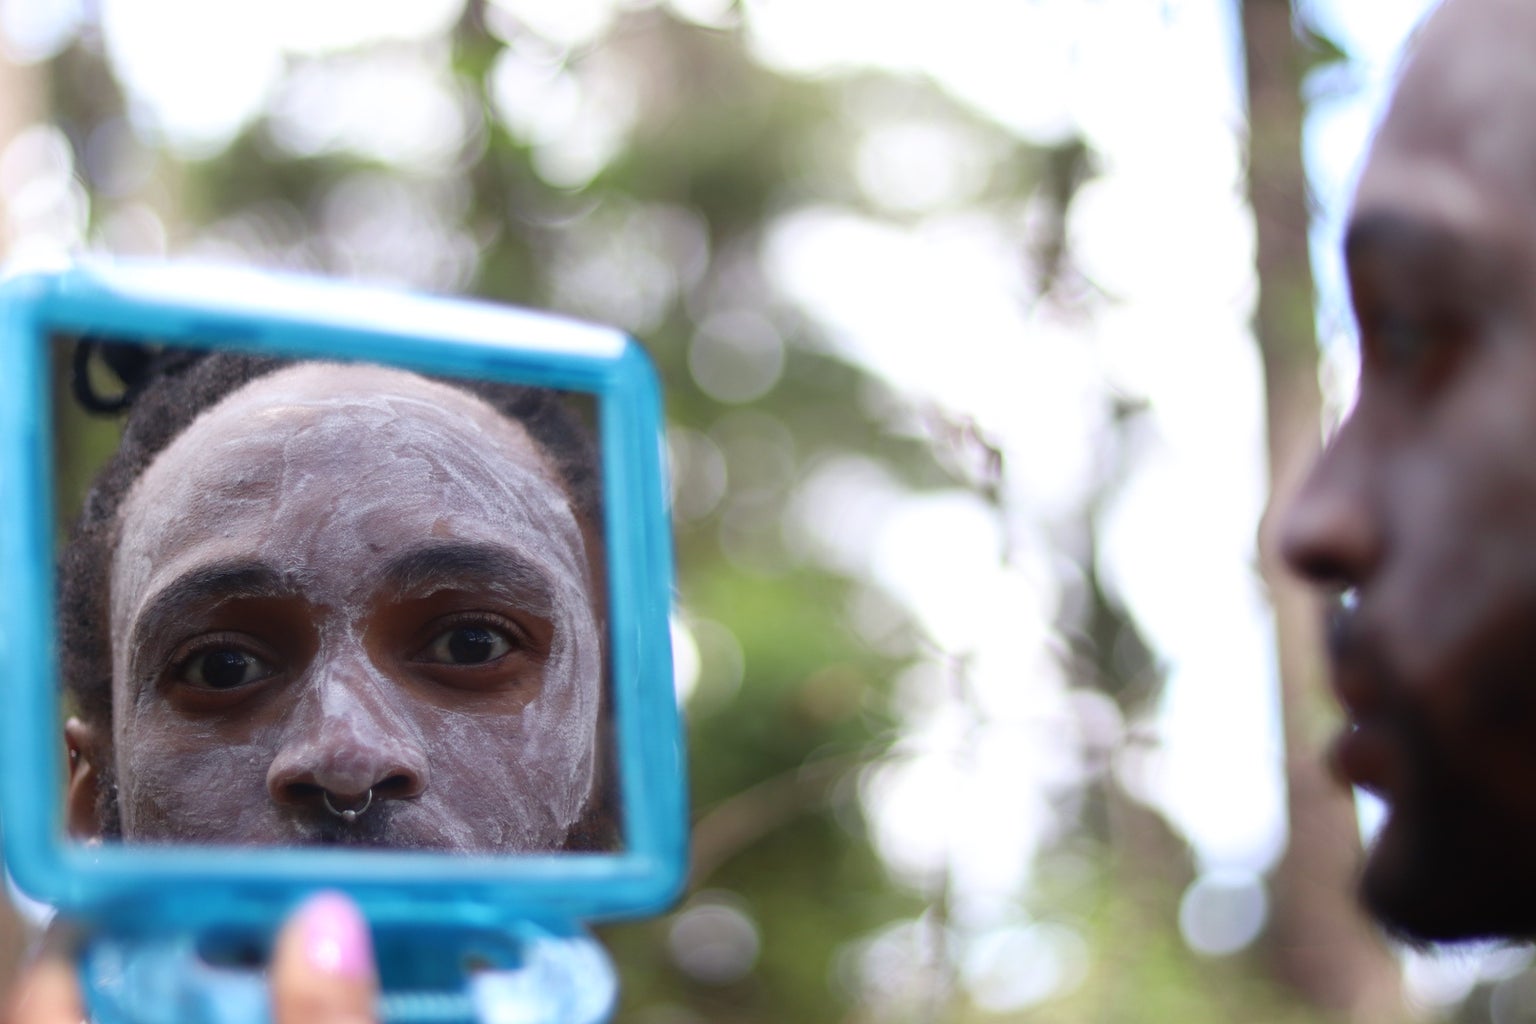 A Xhosa man, wearing traditional face paint, looks in a mirror.